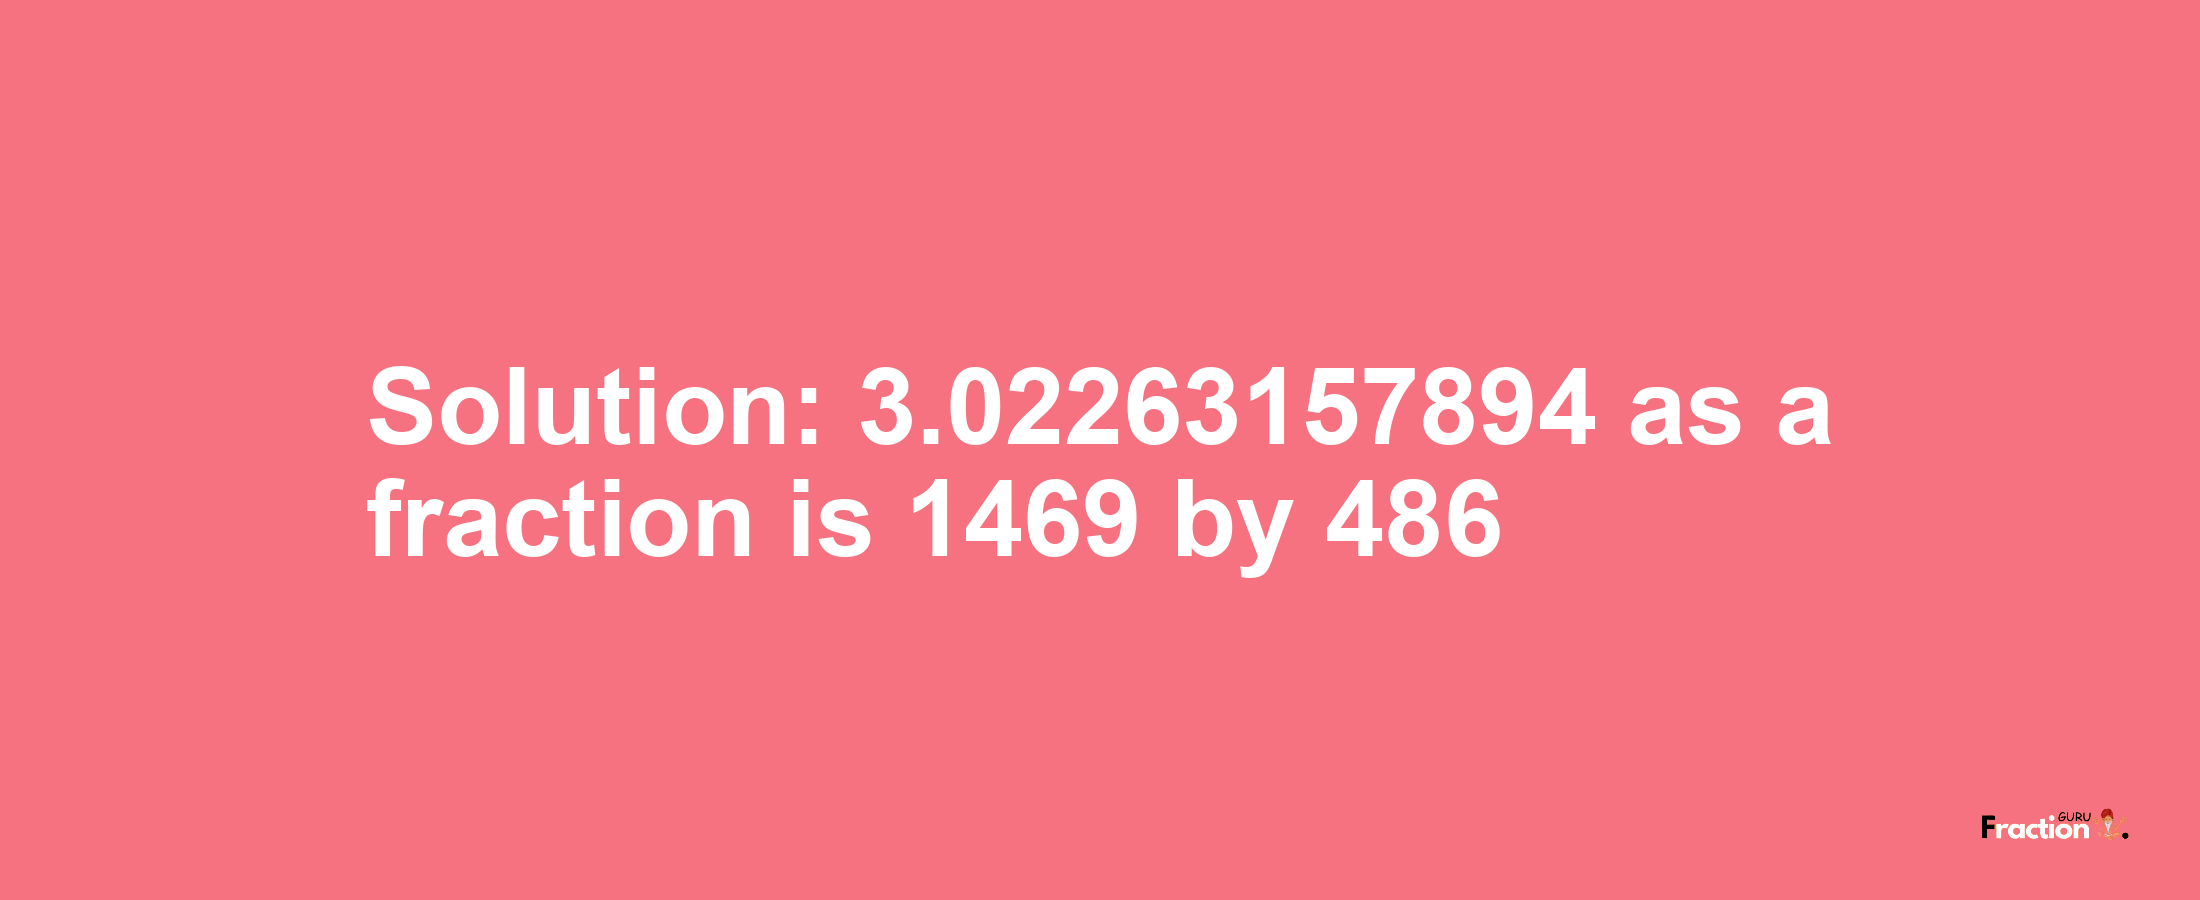 Solution:3.02263157894 as a fraction is 1469/486